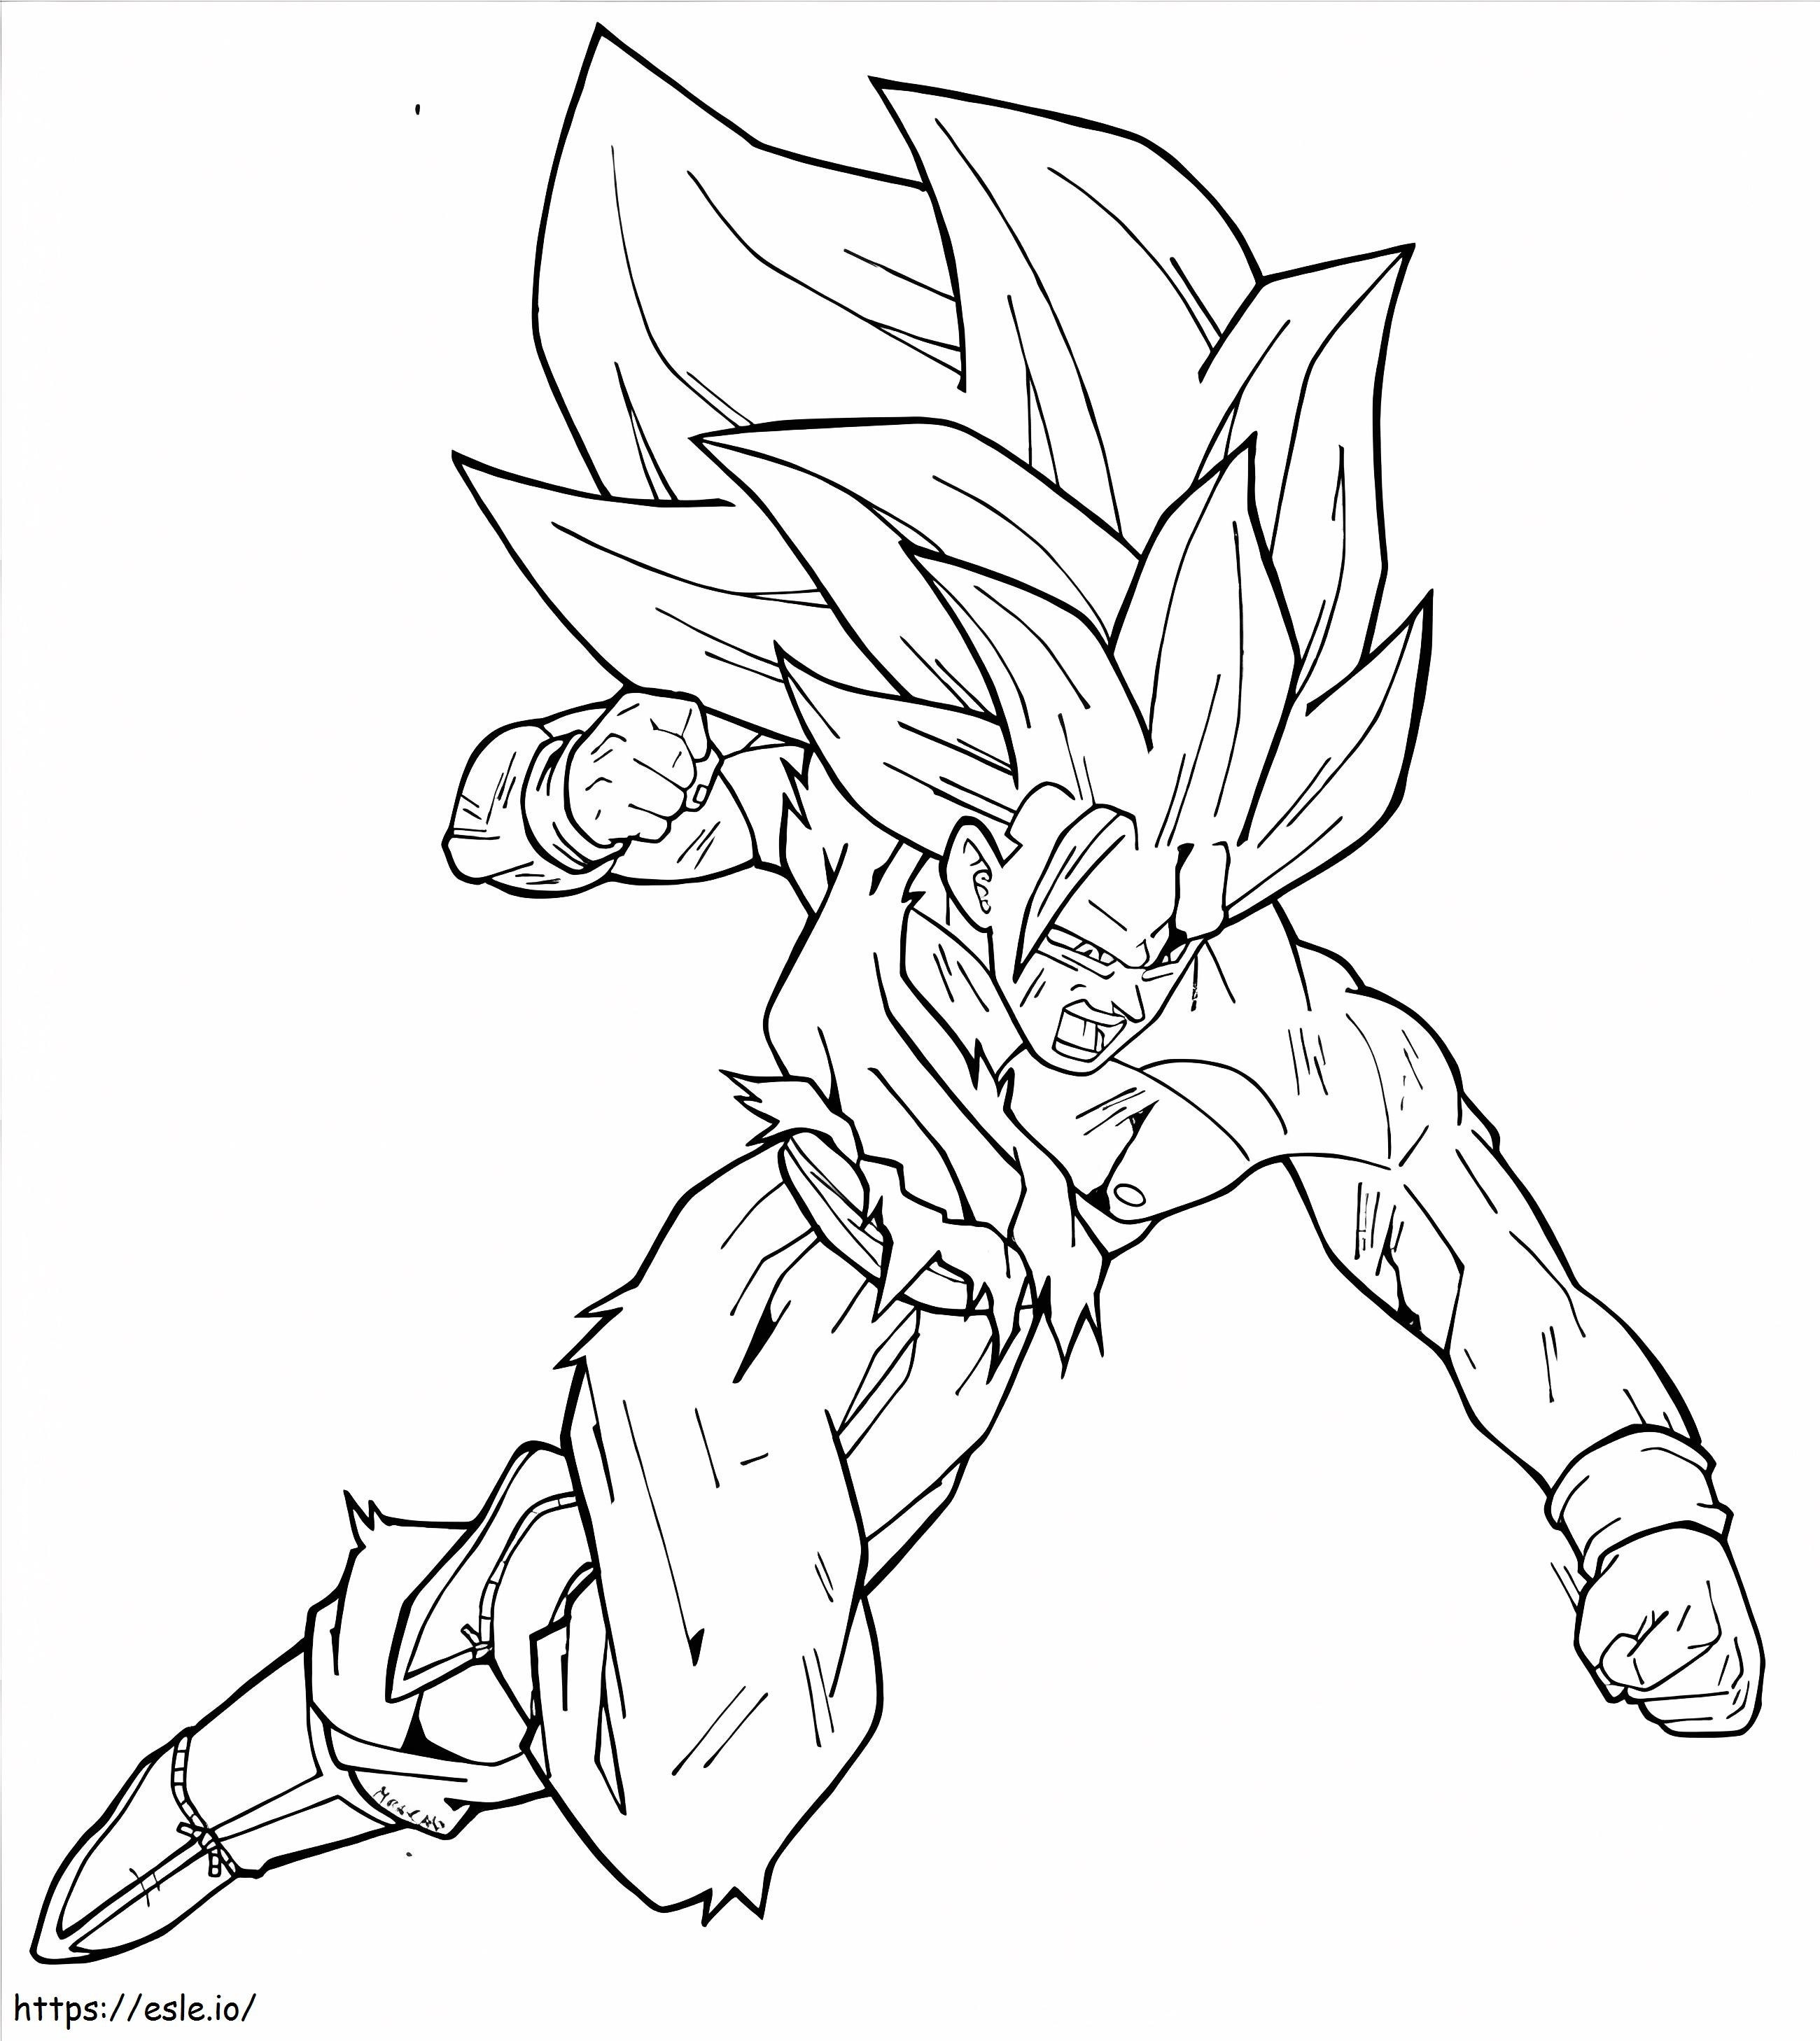 Son Goku Punch coloring page